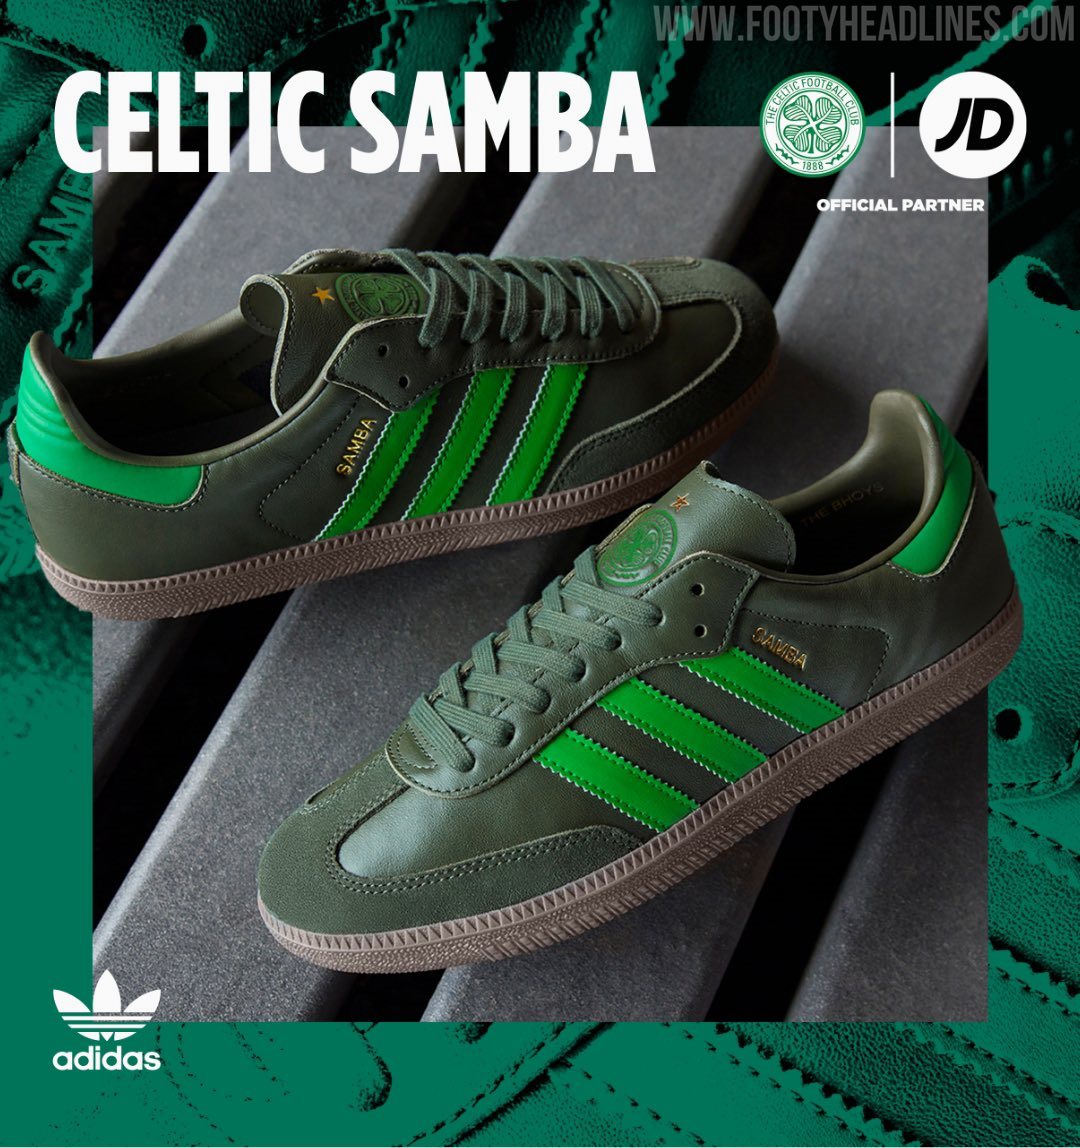 Adidas set to launch limited edition Celtic FC Samba trainers design